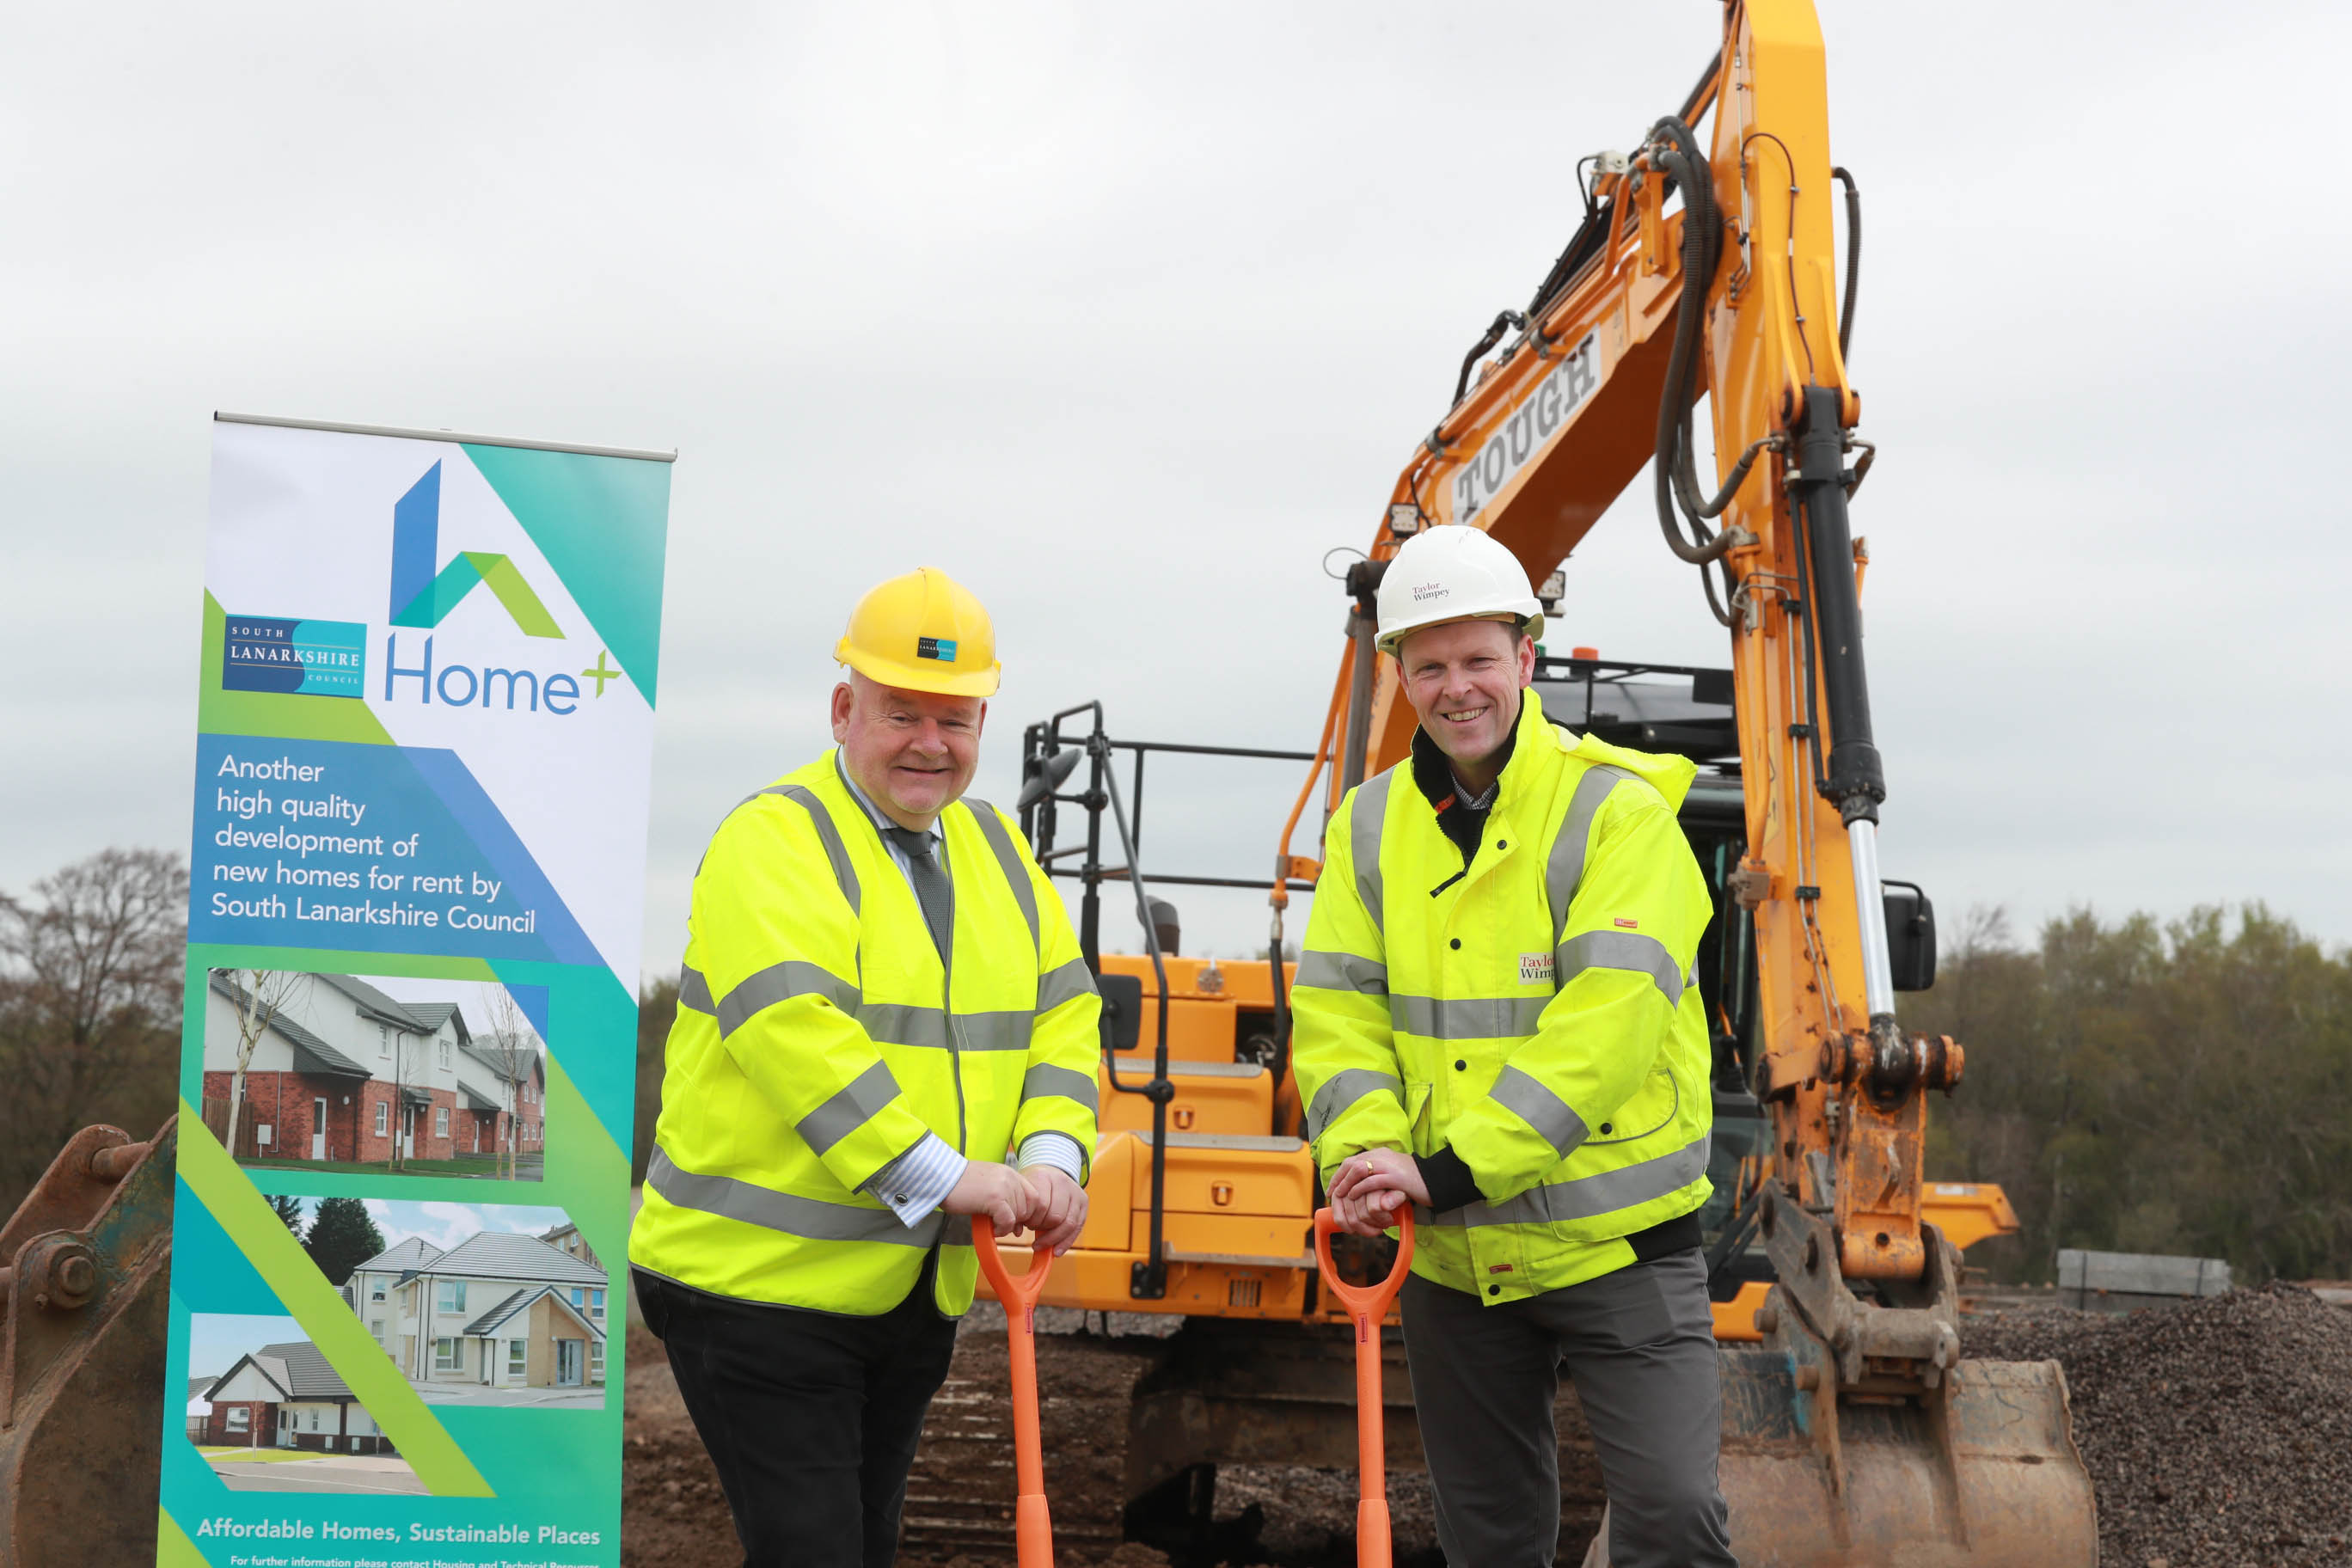 Taylor Wimpey secures deal to deliver 50 affordable homes in Hamilton